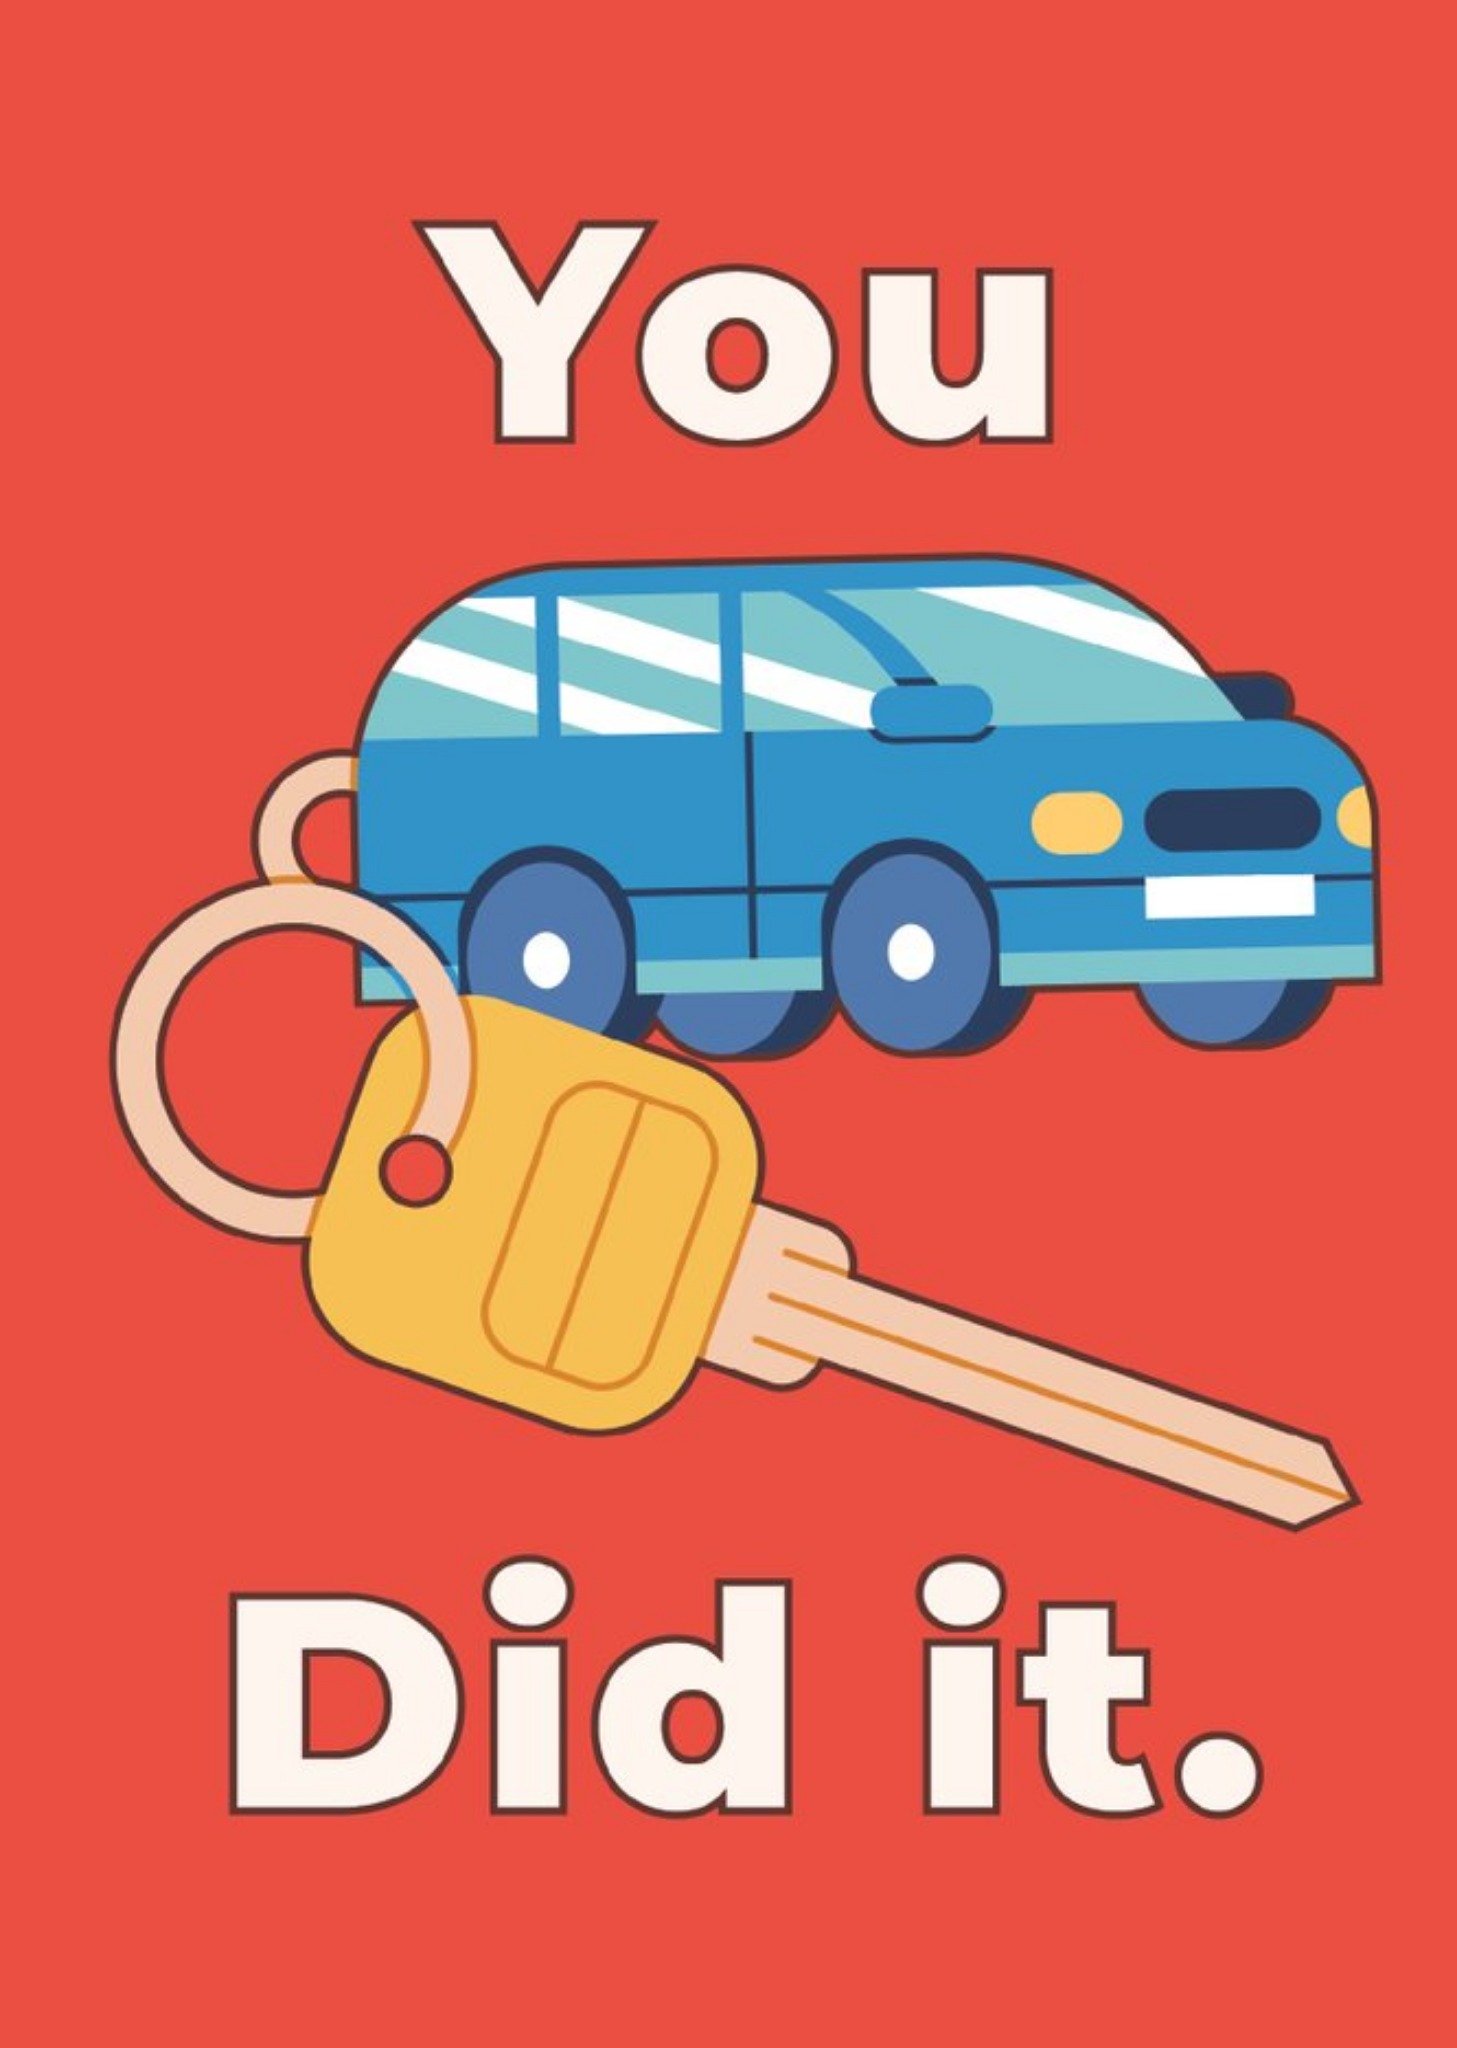 Moonpig Illustration Of A Car And A Key You Did It Driving Test Card Ecard